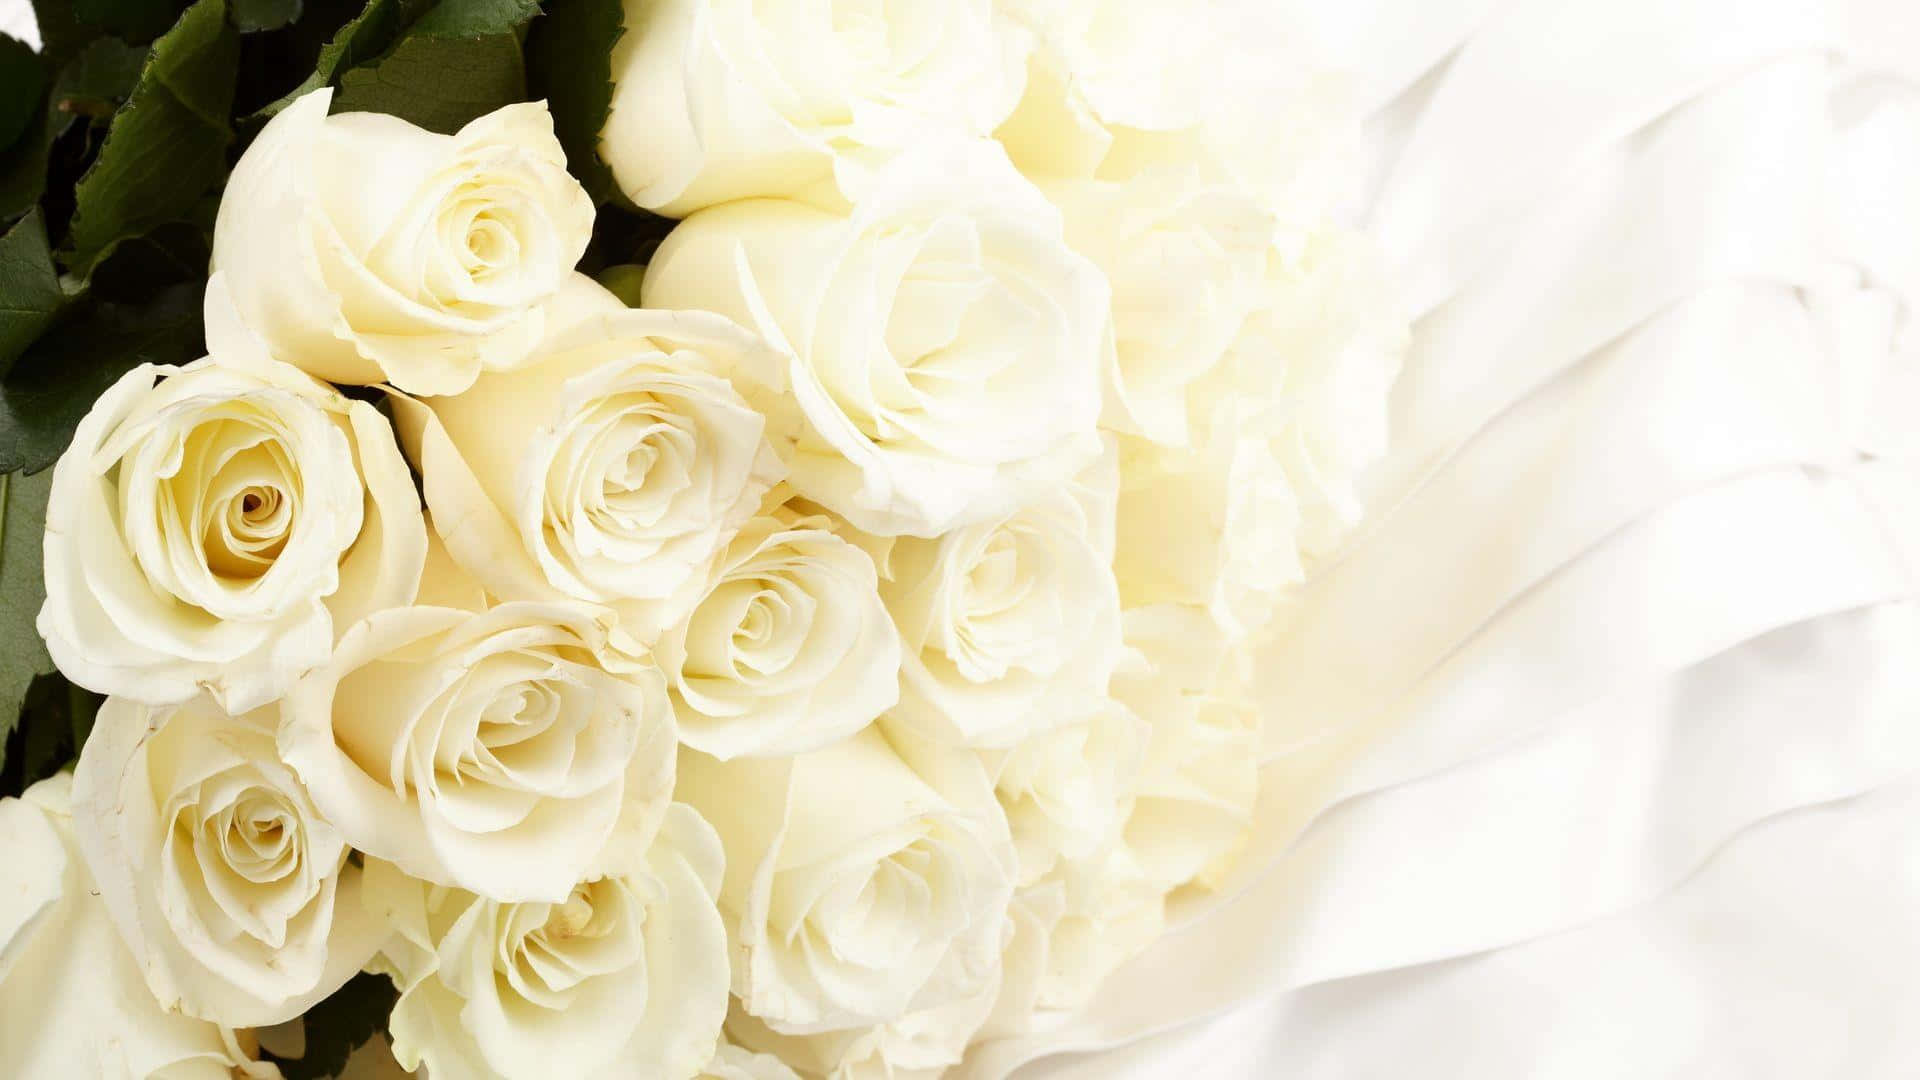 Enjoy the beauty of a White Rose Wallpaper